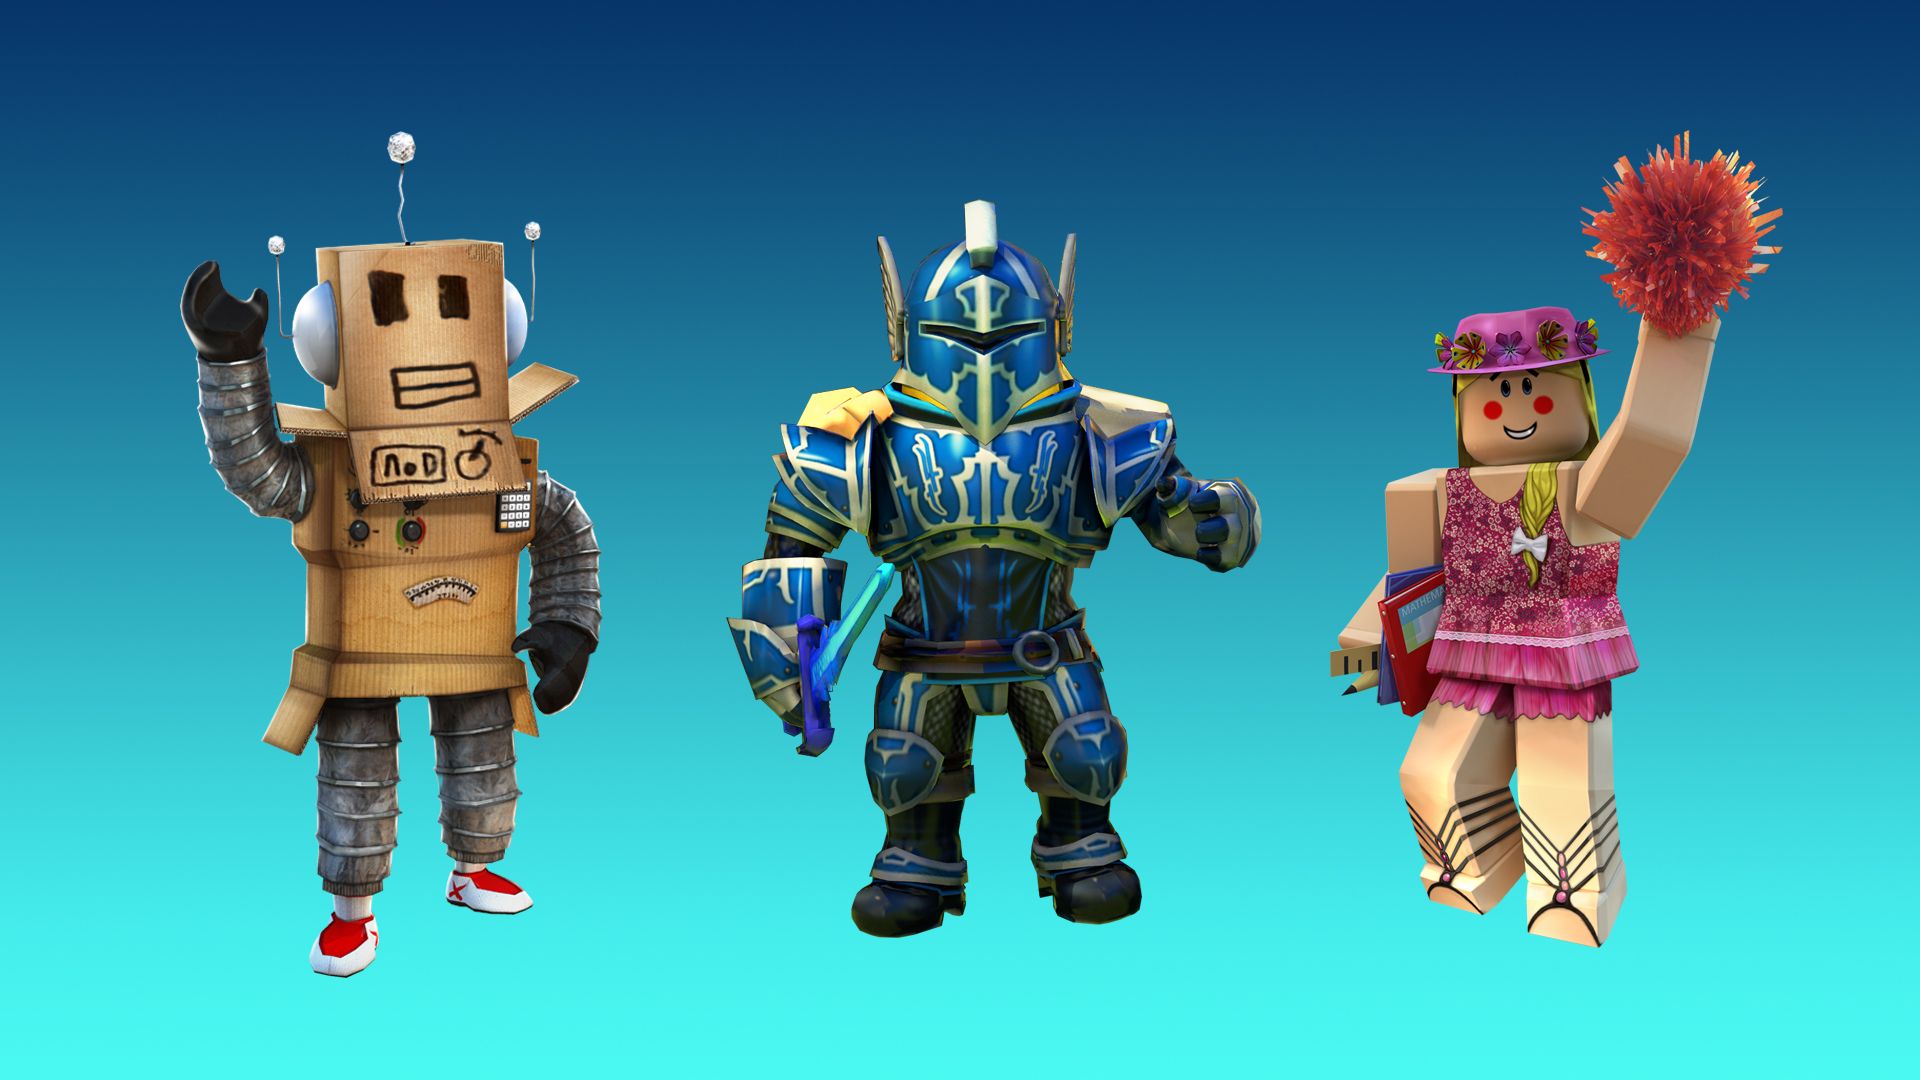 9 Excellent Roblox Arsenal The Boi Nova Skin 1080p Huge Free Wallpaper Download - arsenal roblox cool wallpapers